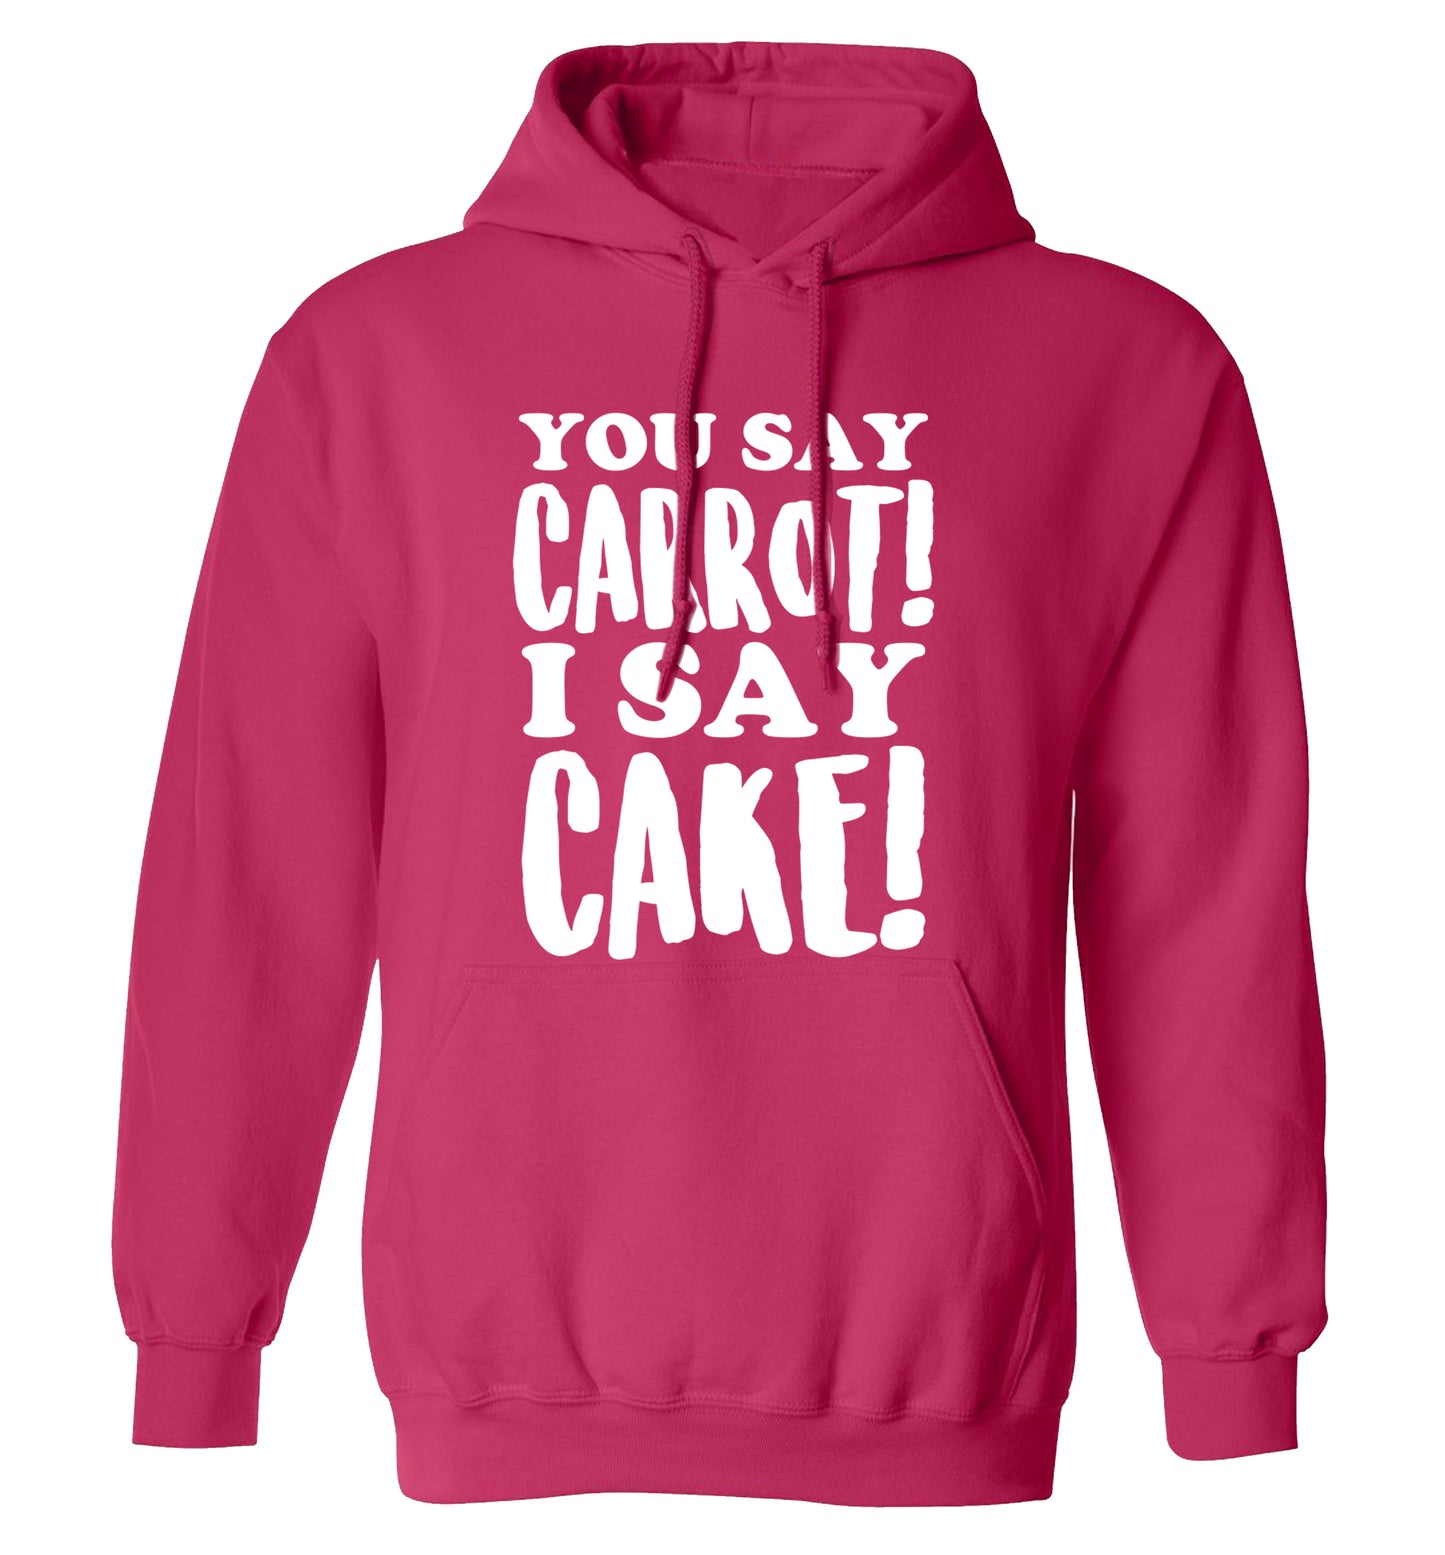 You say carrot I say cake! adults unisex pink hoodie 2XL